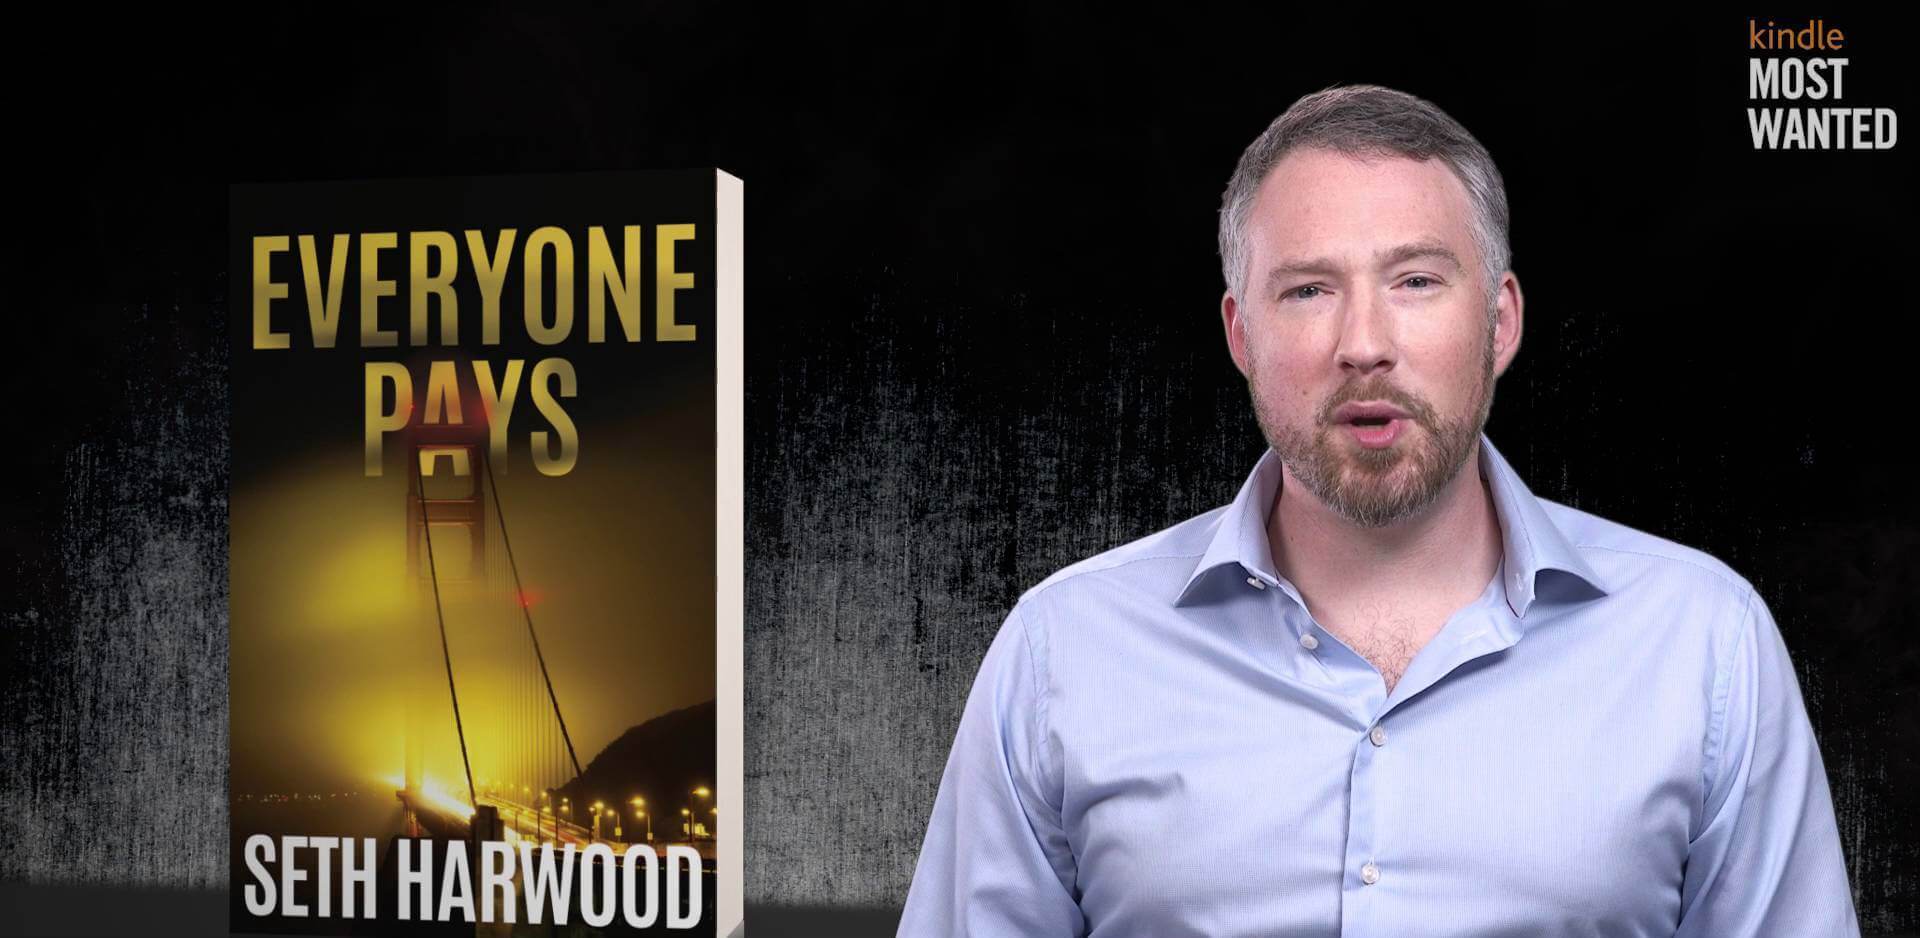 Author, Seth Harwood Interview: “Everyone Pays”